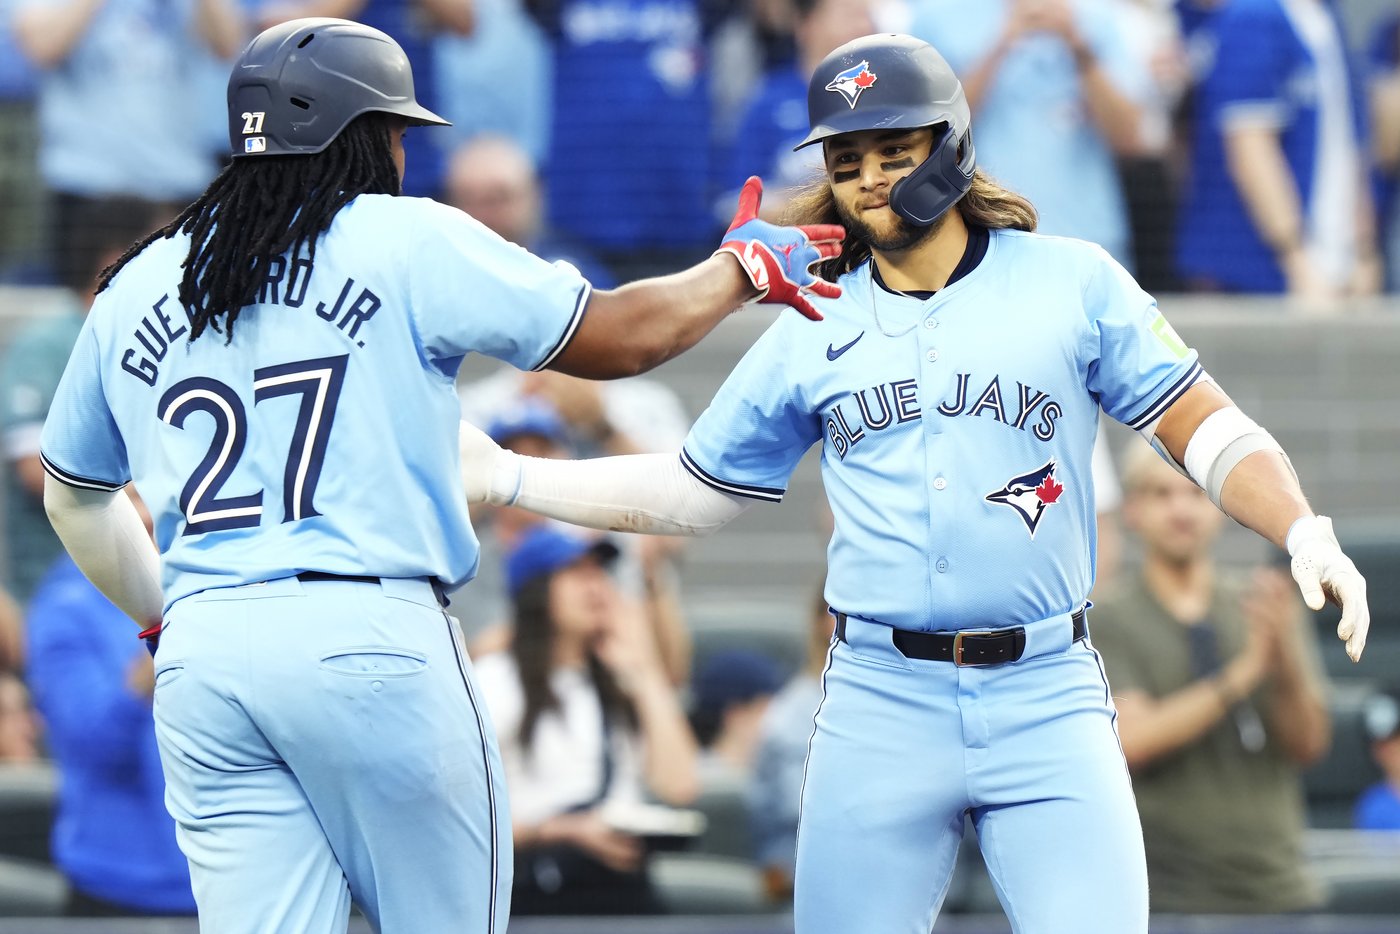 Bichette homers as Jays crush White Sox 9-2 for first series win in a month